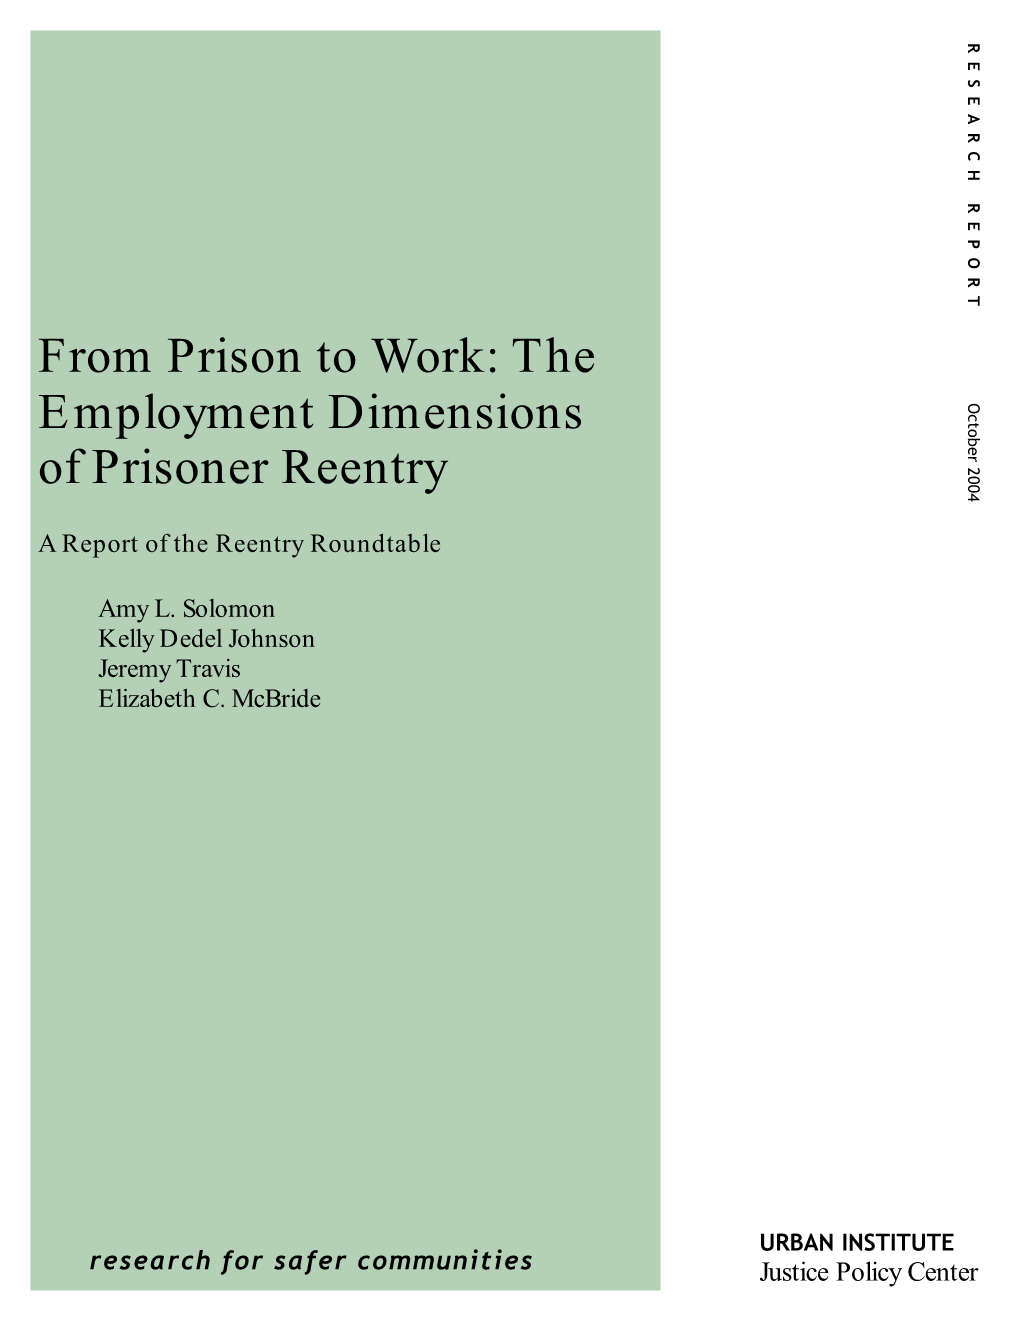 From Prison to Work: the Employment Dimensions of Prisoner Reentry a Report of the Reentry Roundtable